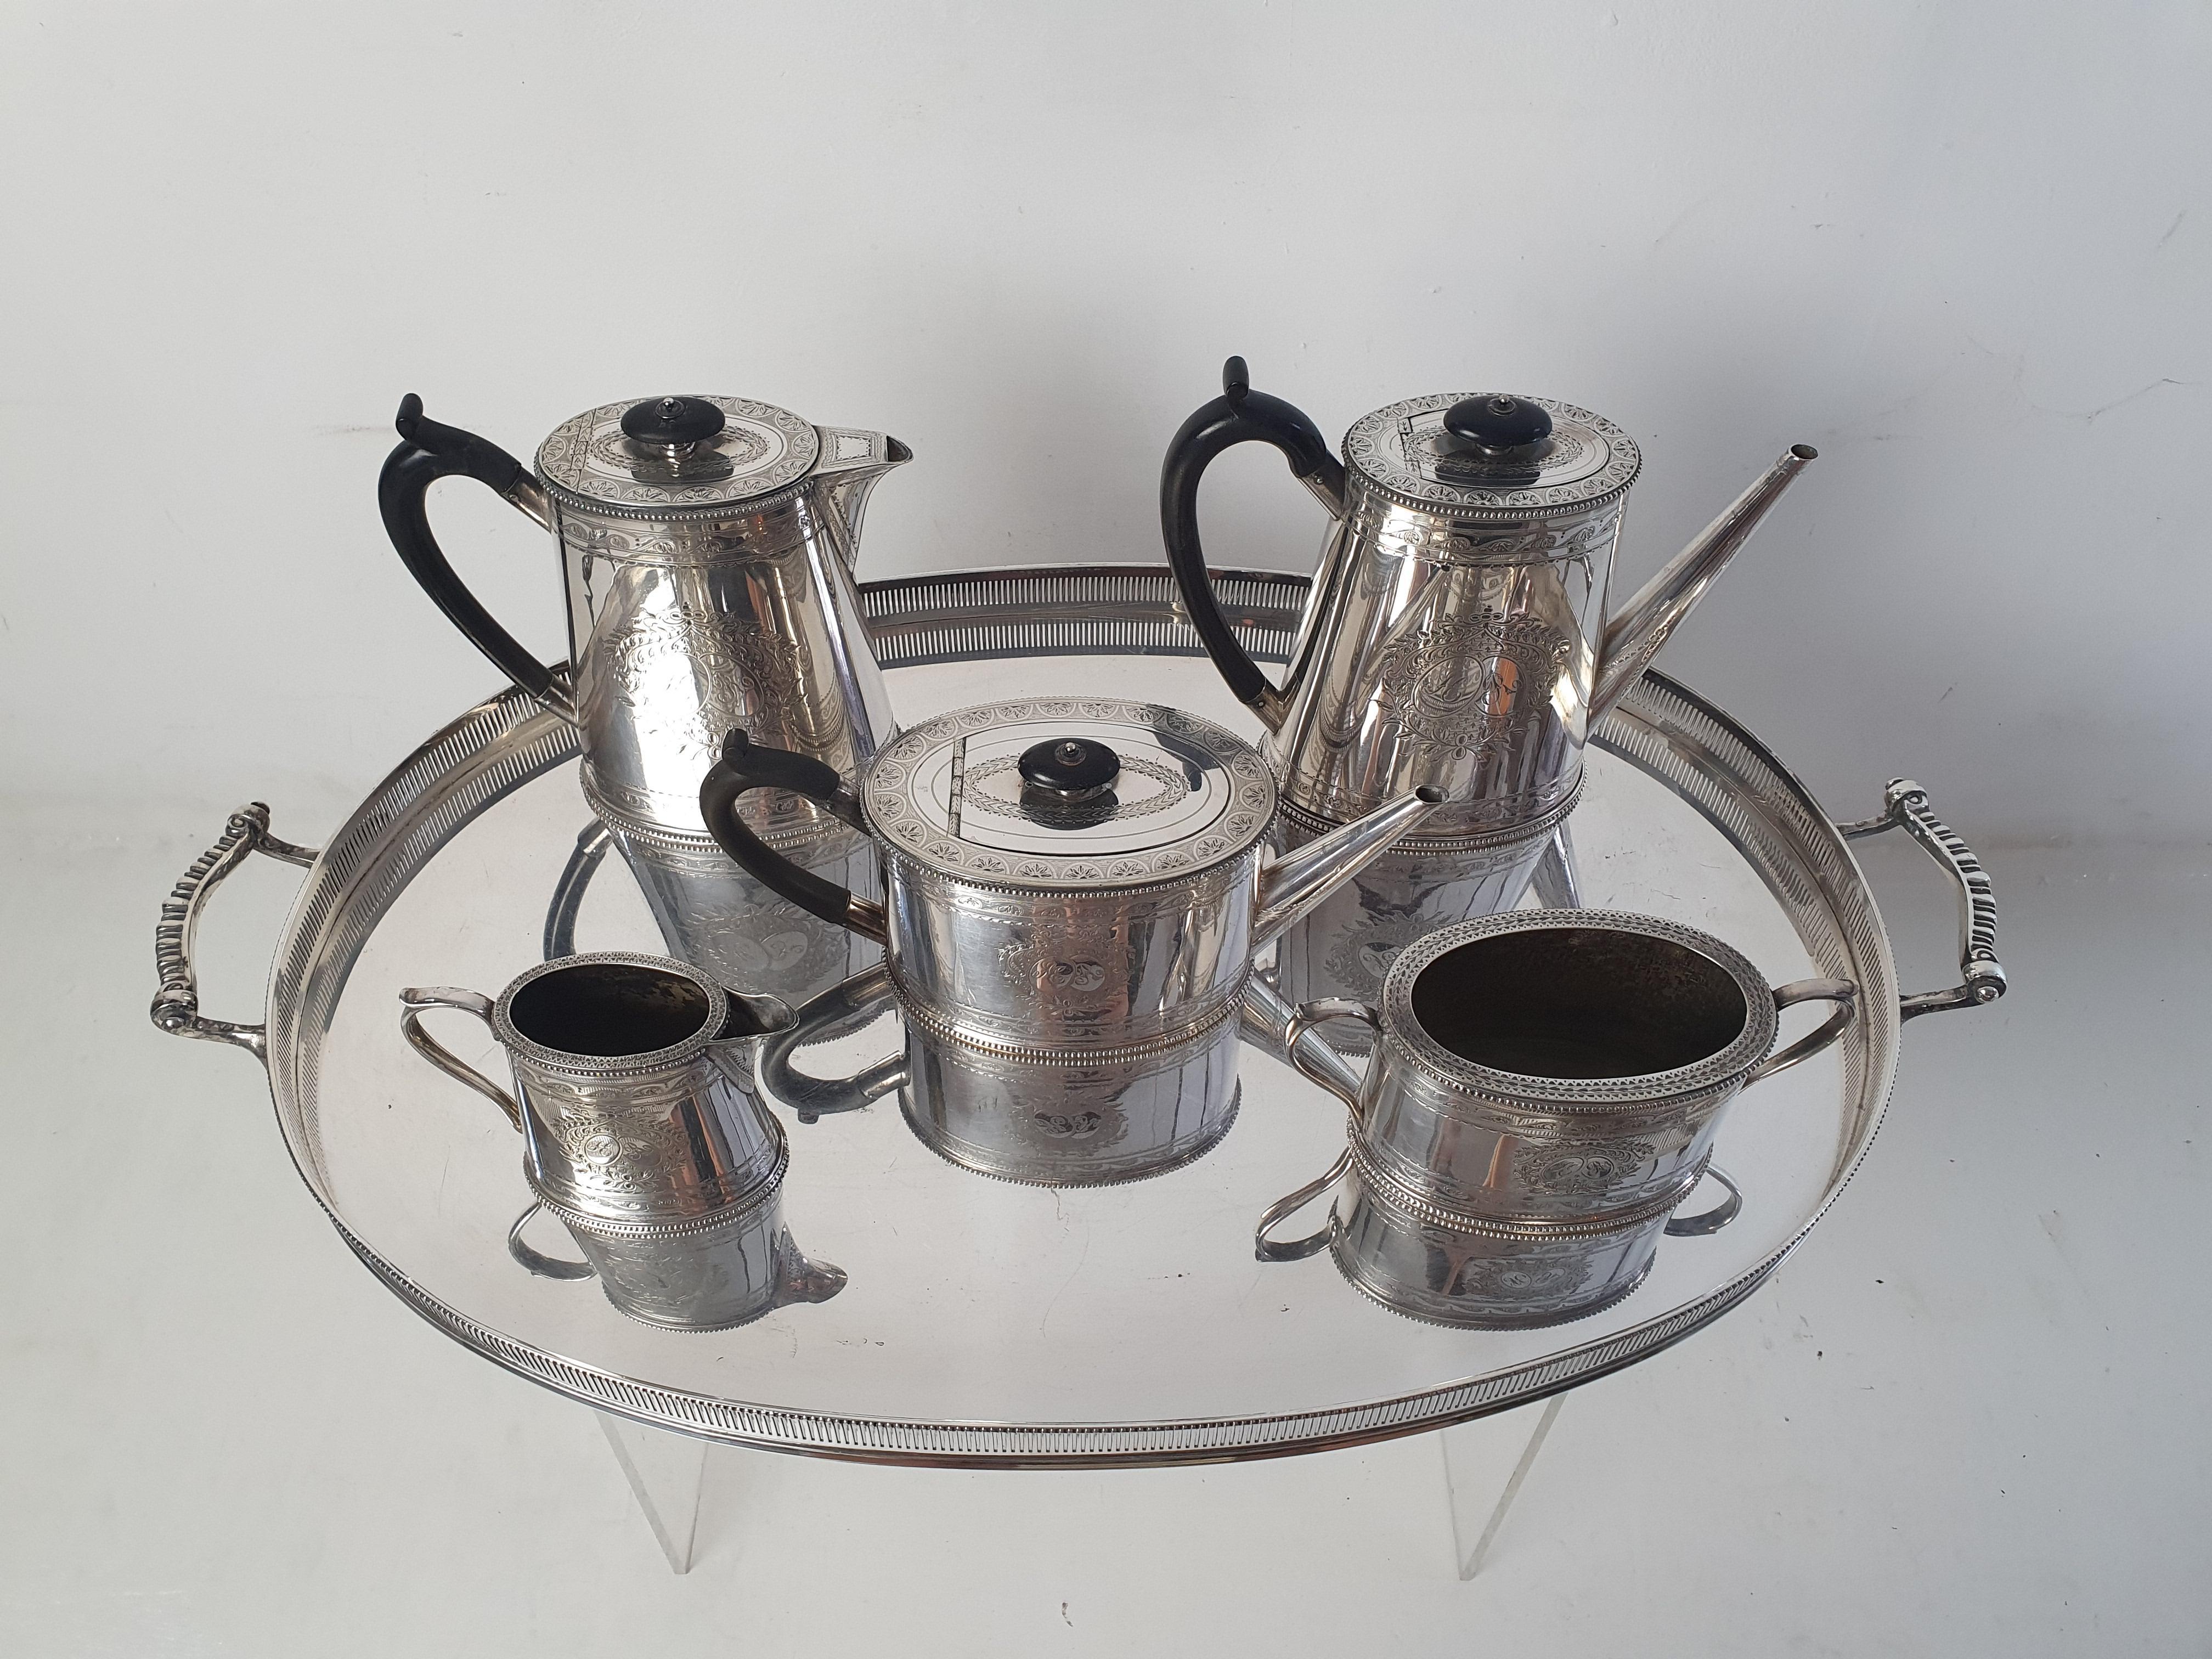 Classic high-quality silver-plated tea and coffee set. The pieces are embellished with elegant and elaborate engravings that frame the initials 